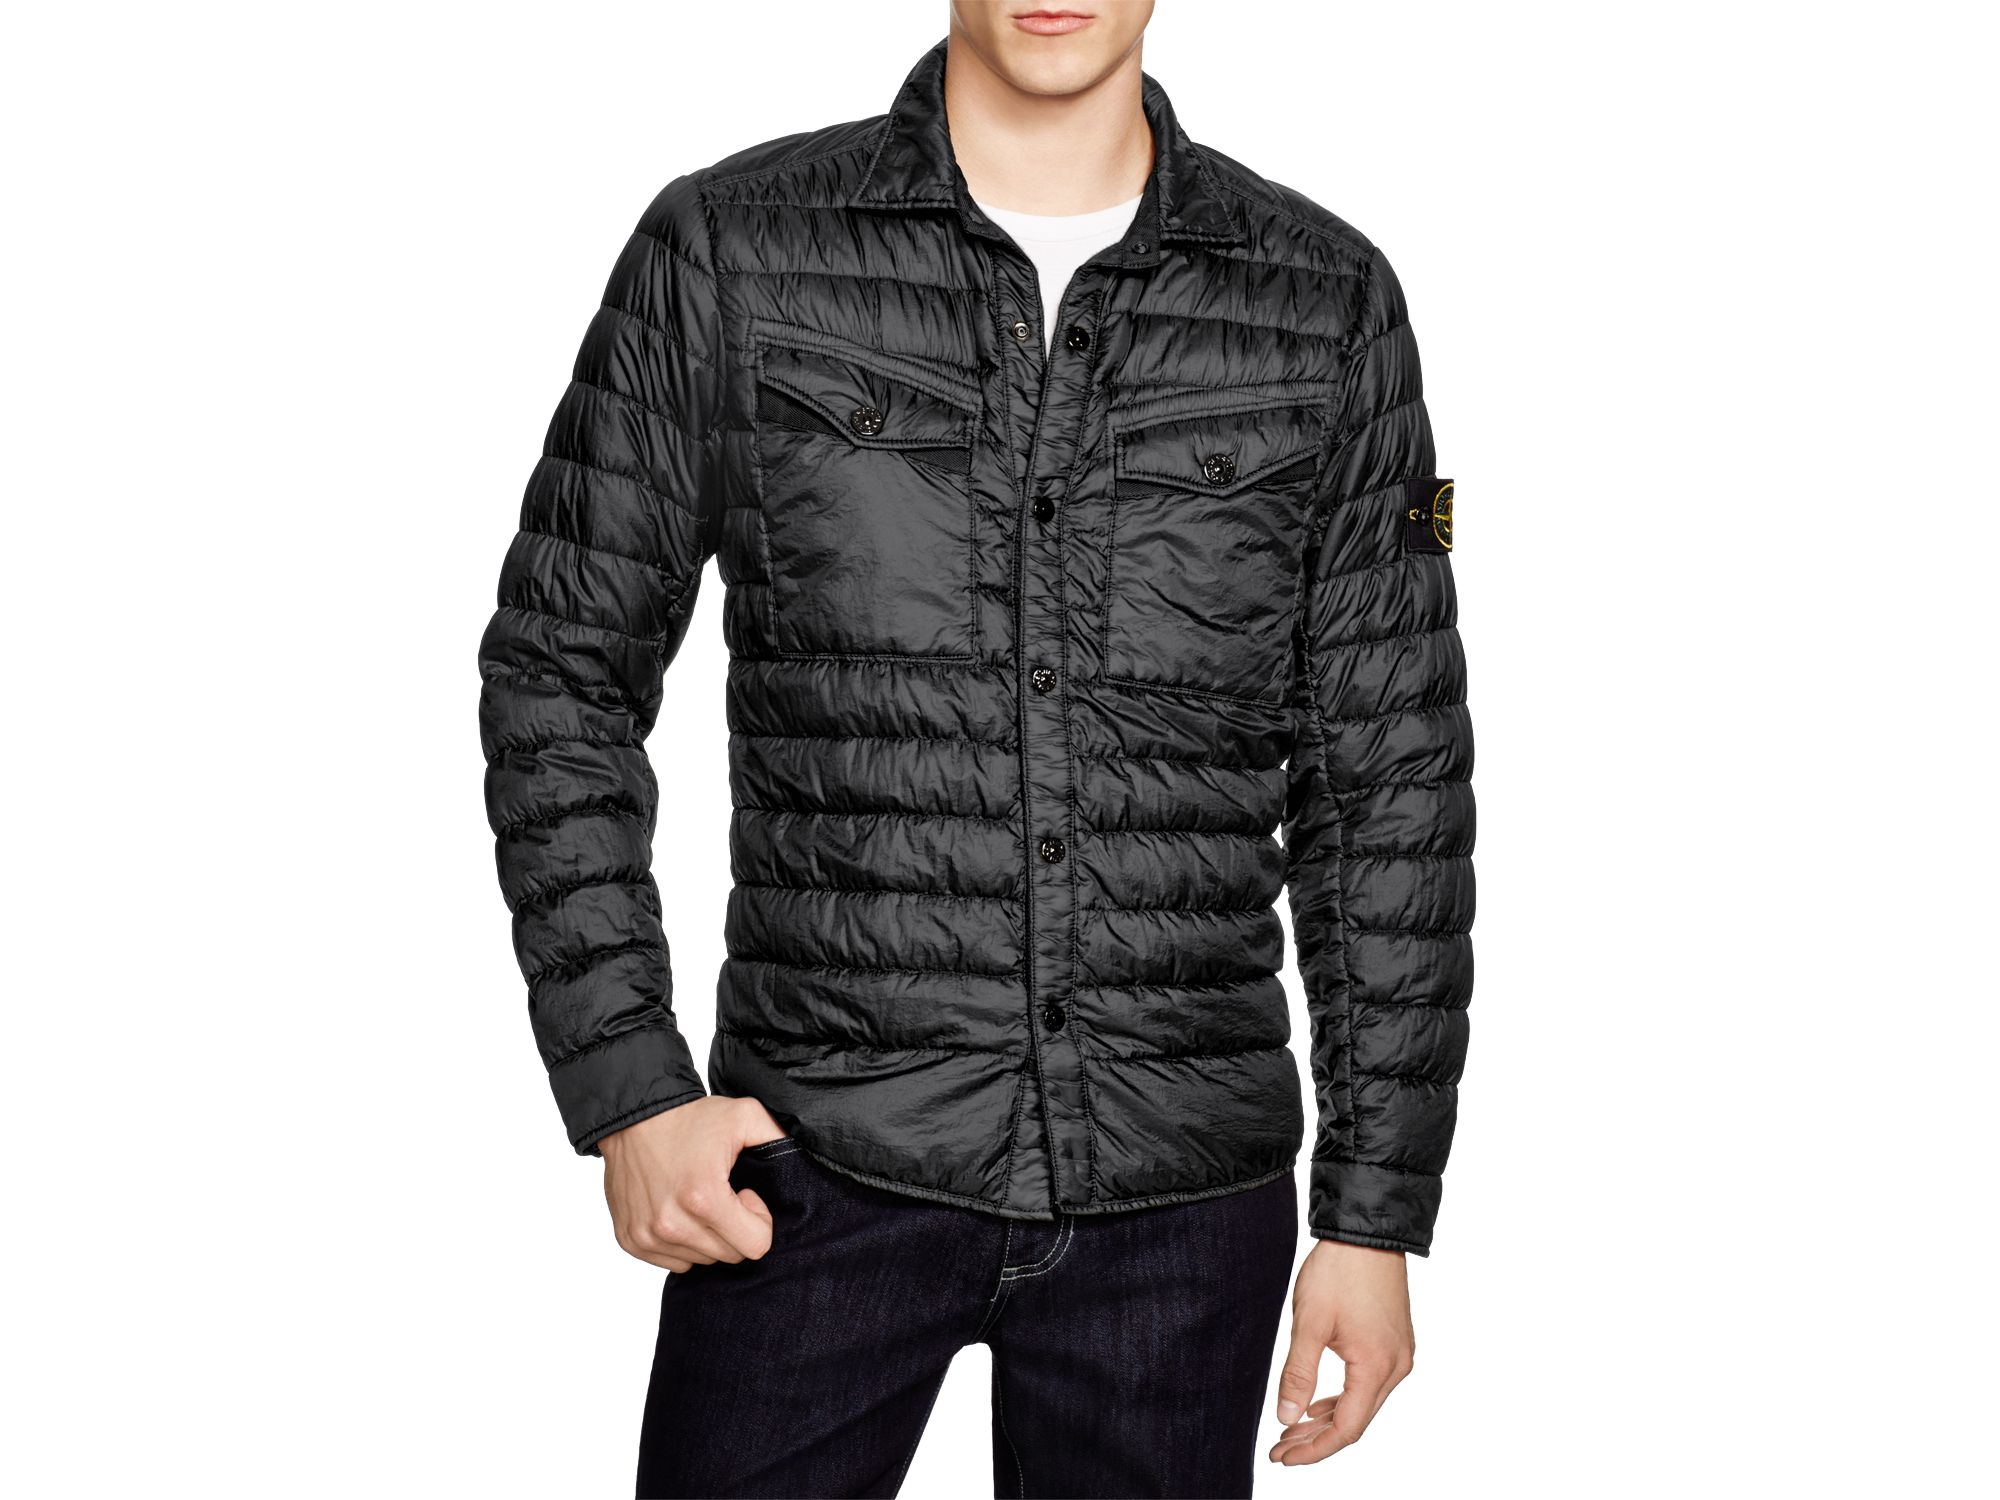 Stone Island Down Shirt Jacket in Charcoal (Black) for Men - Lyst